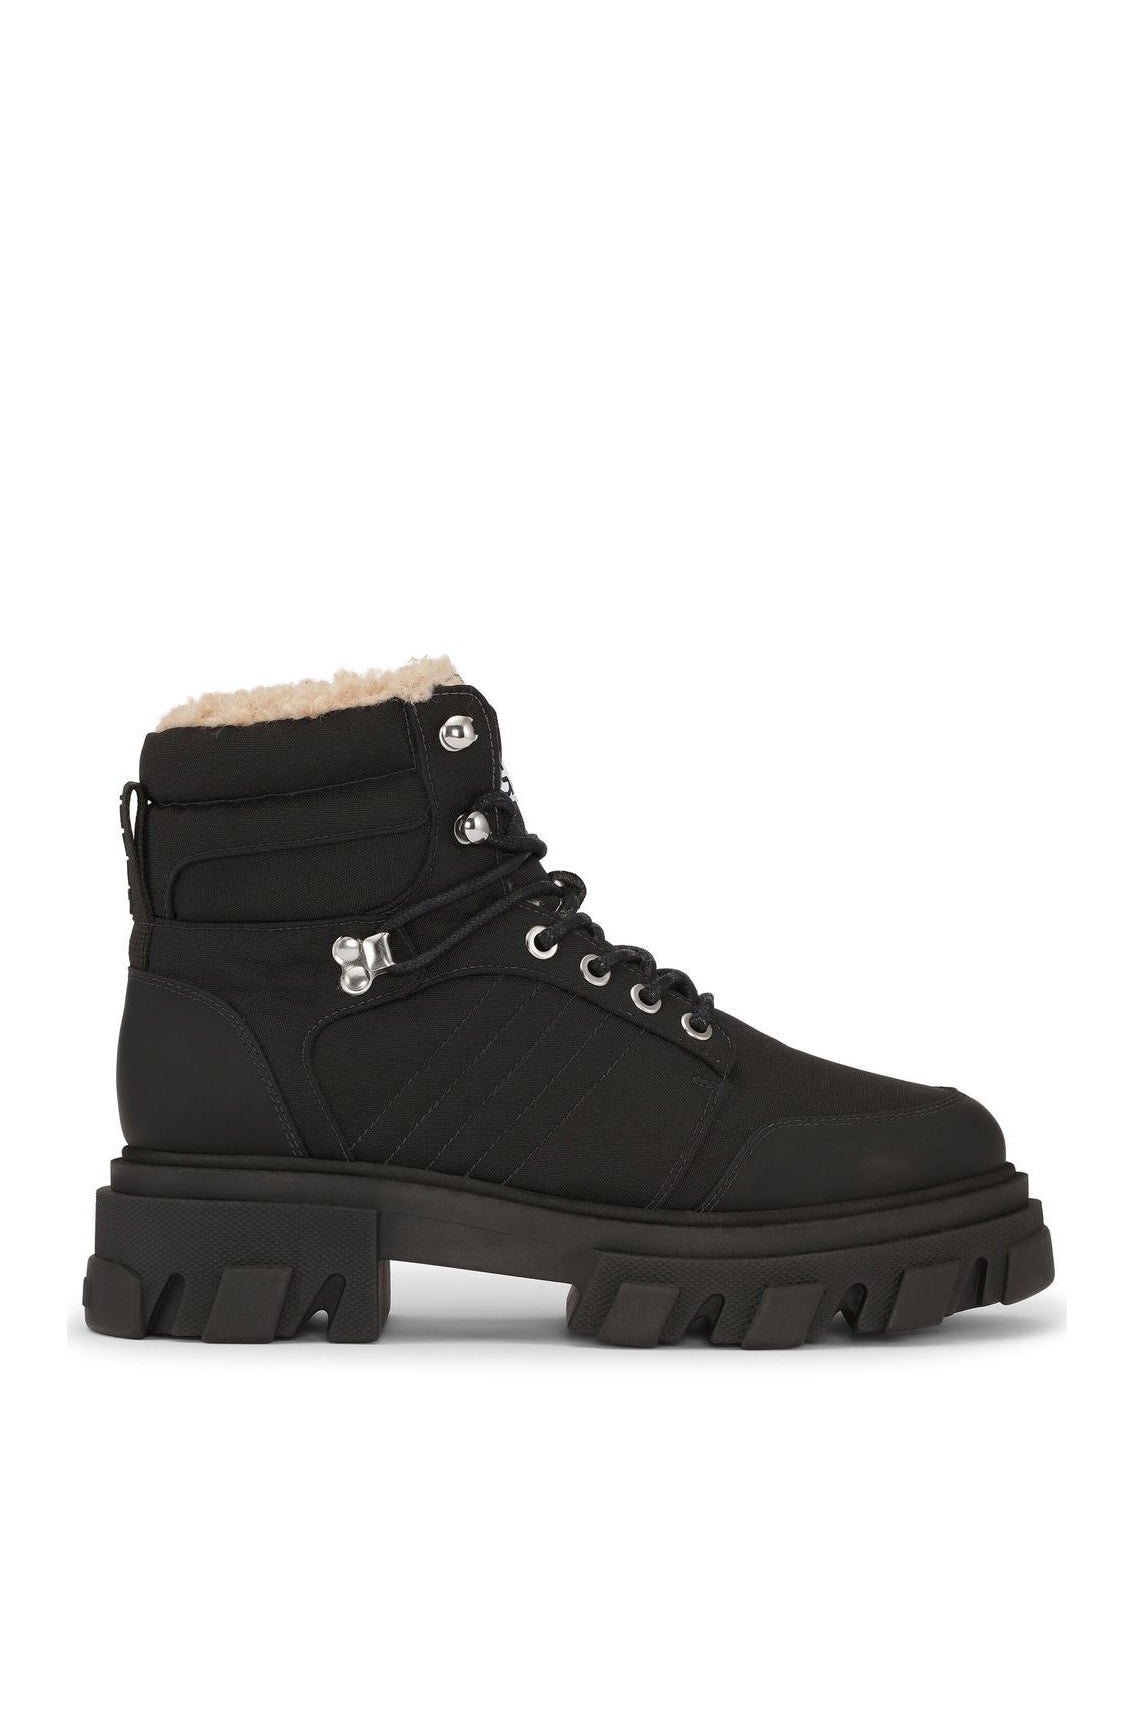 Lace-up hiking boots, black